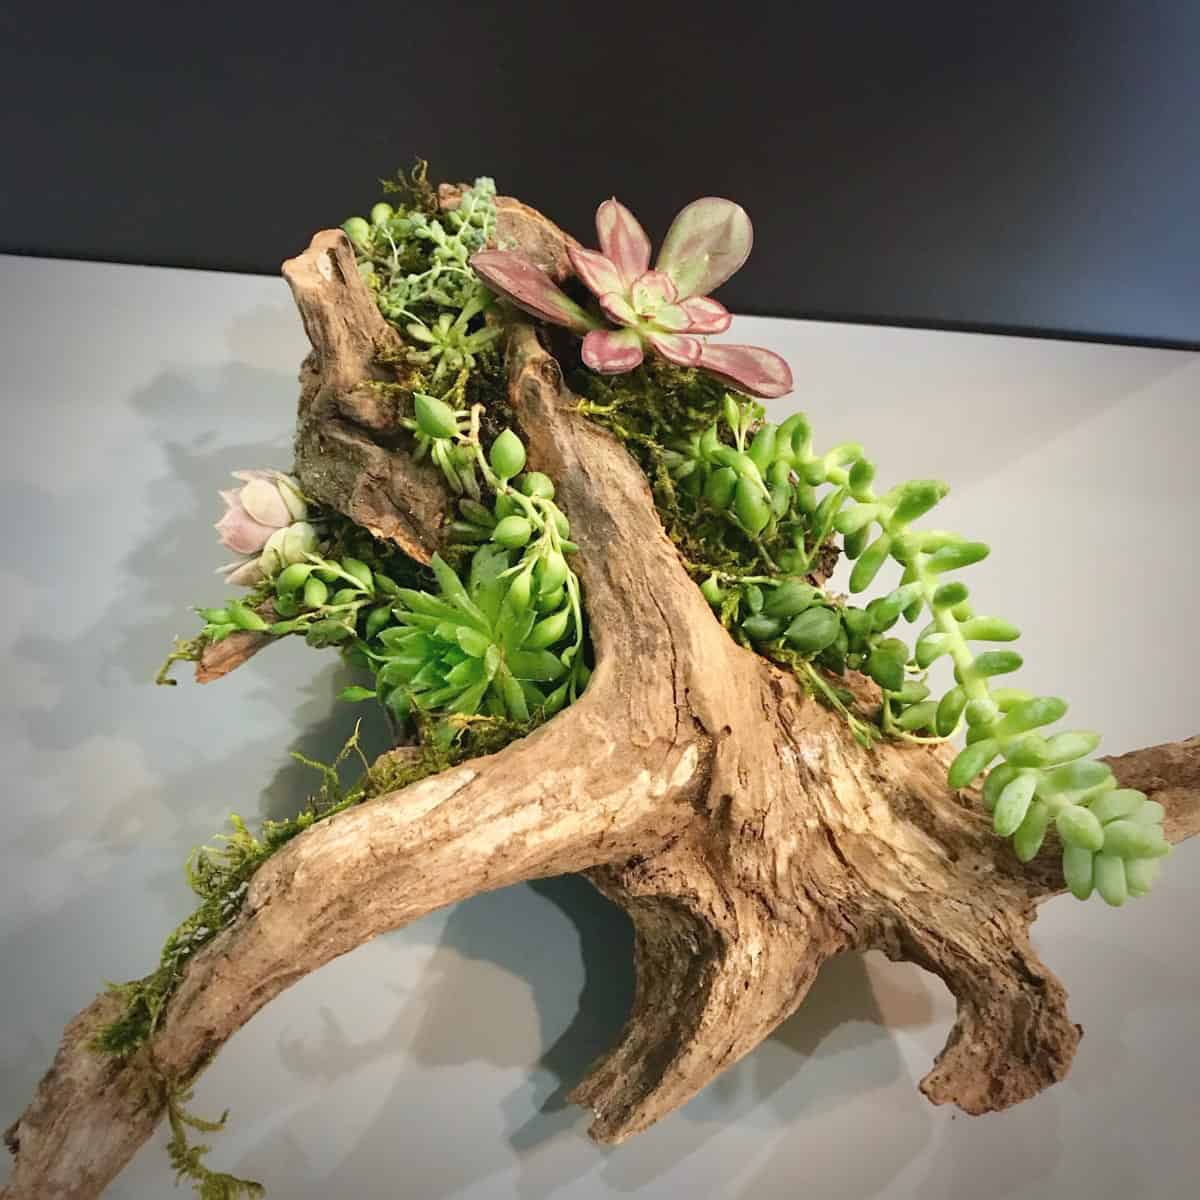 diy driftwood planter with succulents attahced.